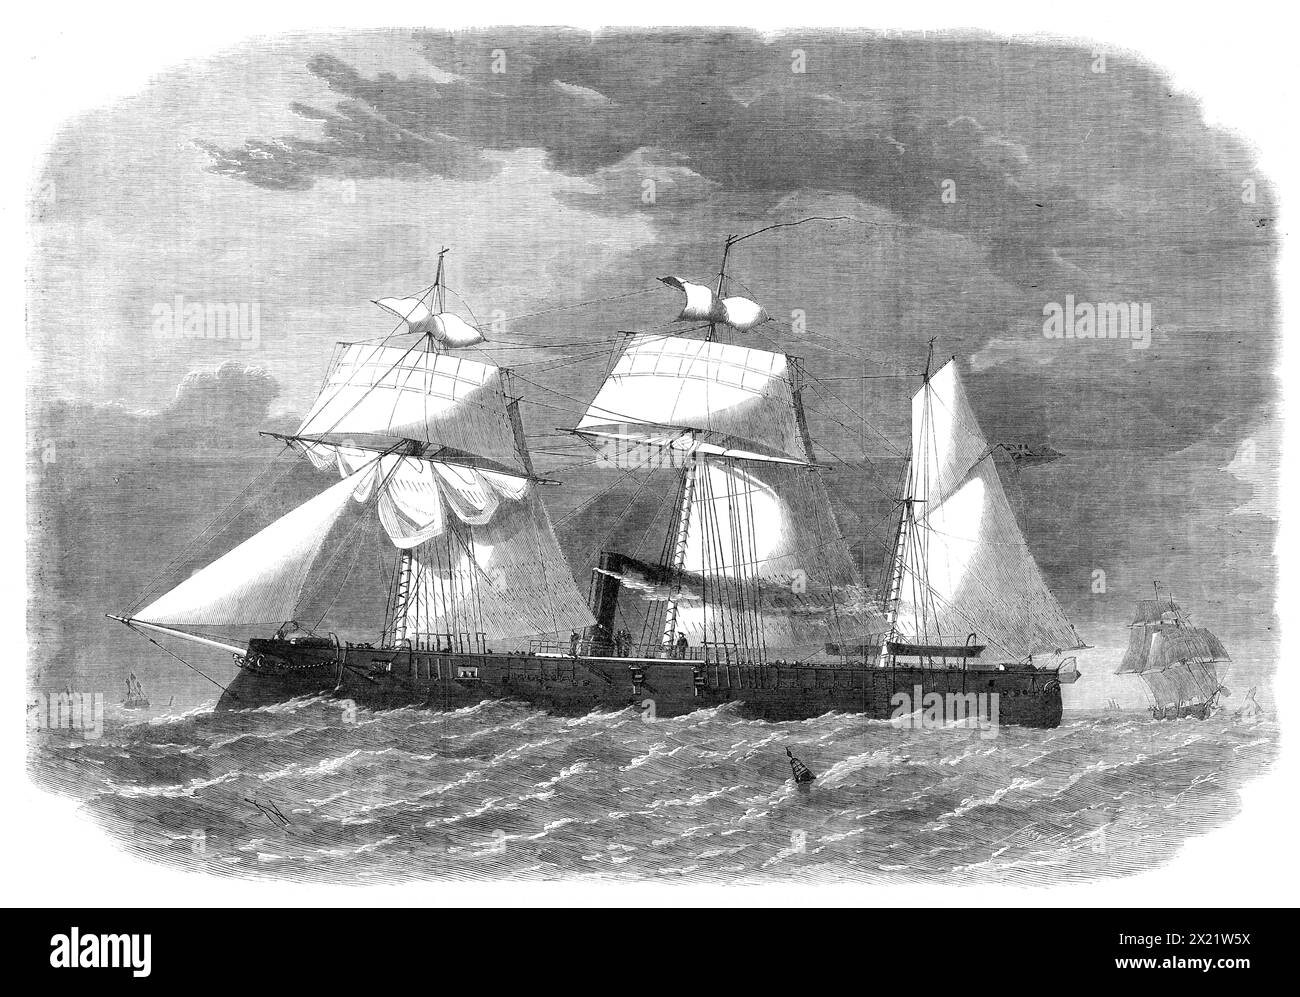 The new iron-clad fleet: Her Majesty's sloop-of-war Enterprise, 1864. 'She is the smallest vessel plated with 4&#xbd;-inch armour that has yet been set afloat. In his designs for this vessel the Chief Constructor of the Navy, Mr. Reed, has sought to avoid the necessity of extraordinary weights and dimensions by shortening the battery and confining it as nearly as possible to the centre of the ship. The timber framework which he has turned to such good account was originally intended to support an armament of seventeen 32-pounder guns; but, having converted the ship from an ordinary wooden sloo Stock Photo